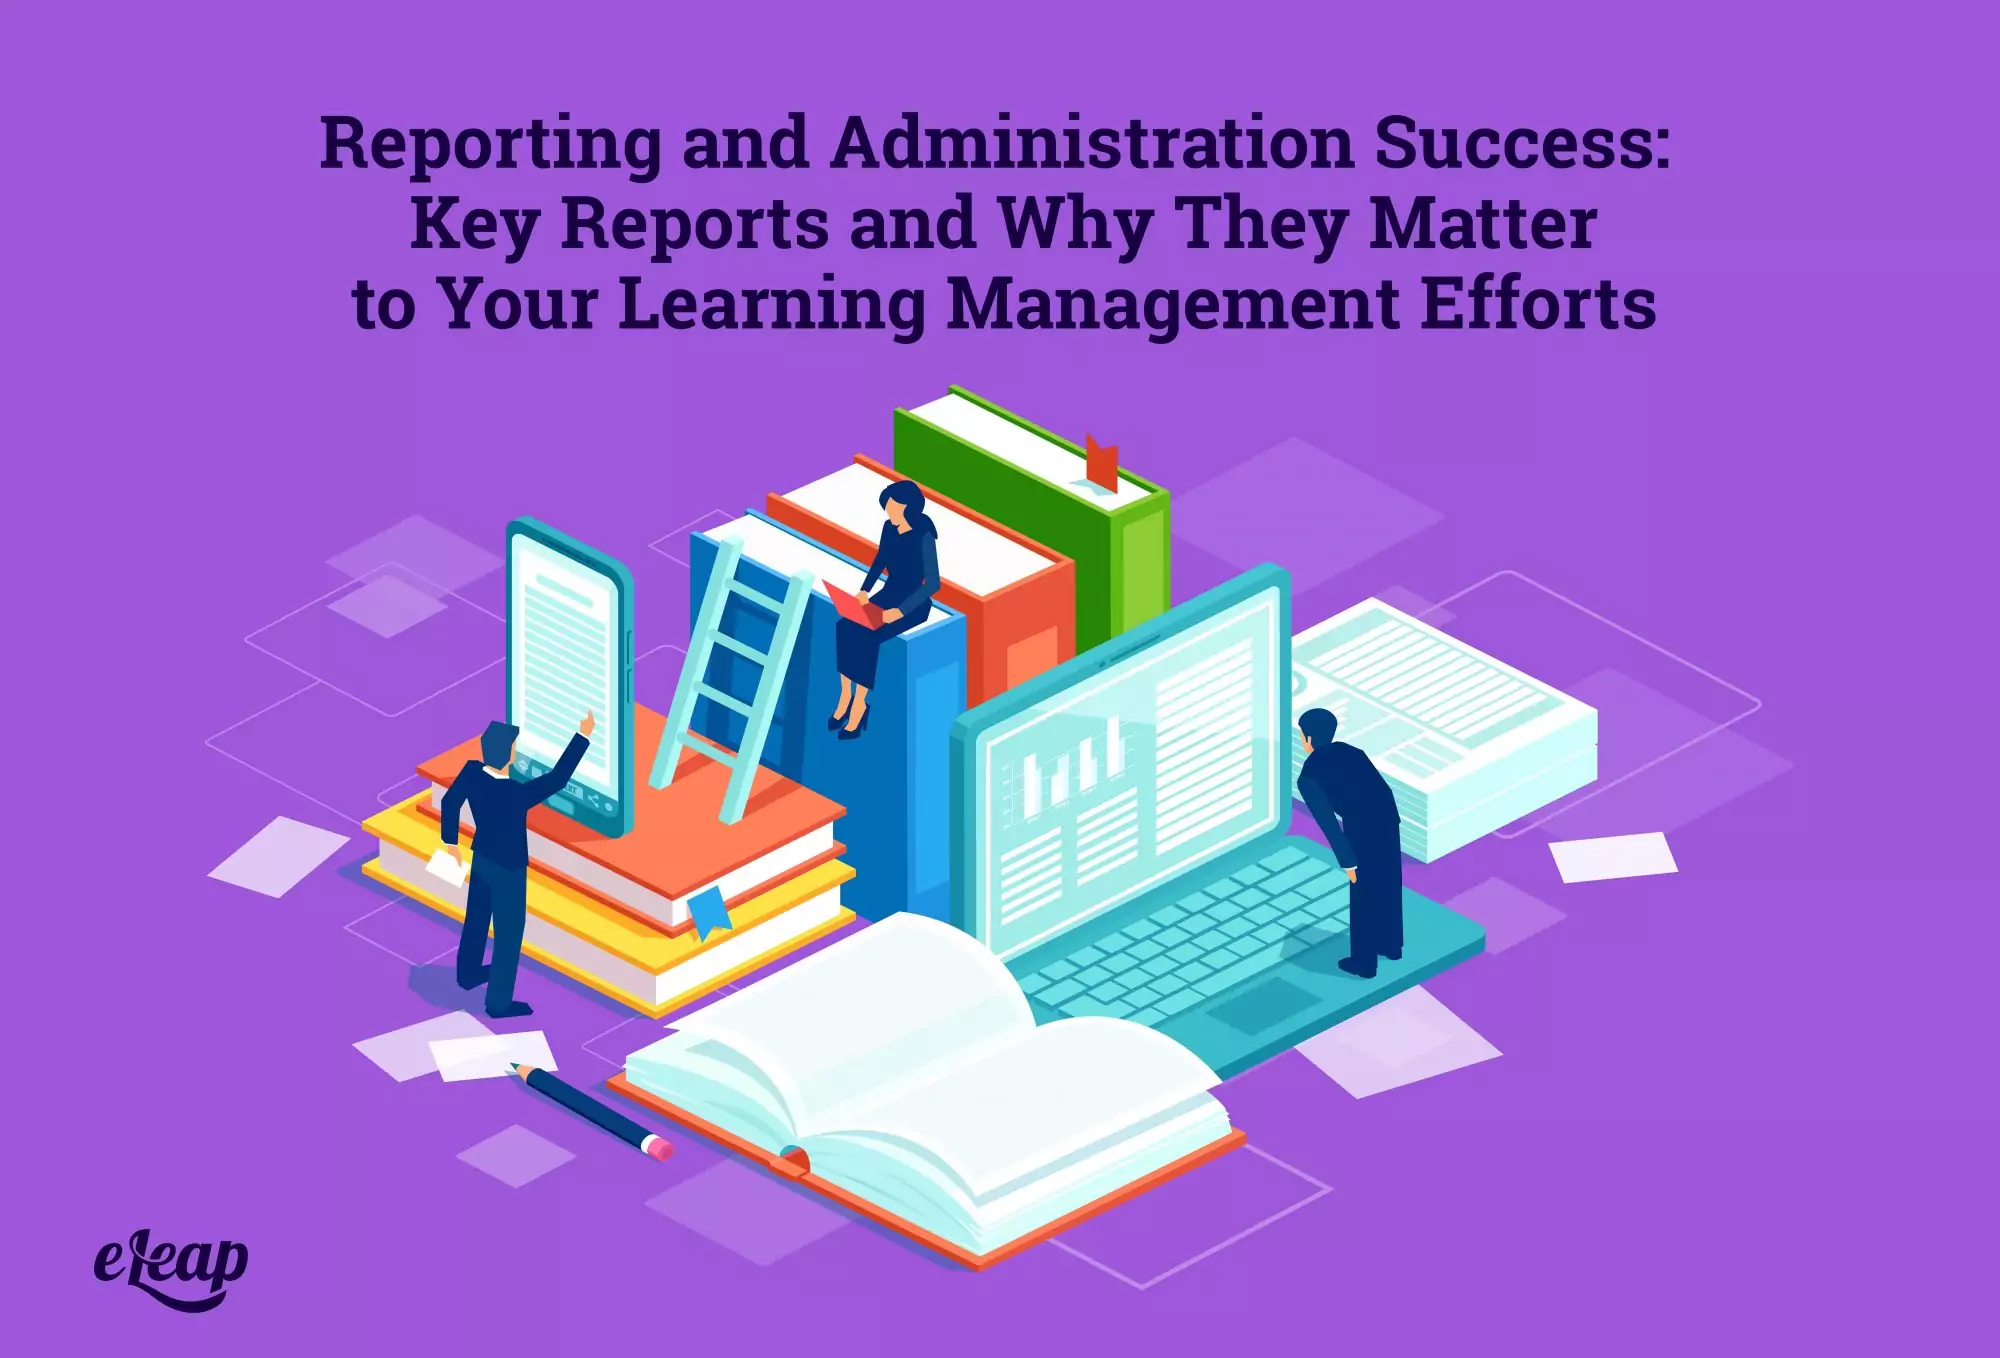 Reporting and Administration Success: Key Reports and Why They Matter to Your Learning Management Efforts